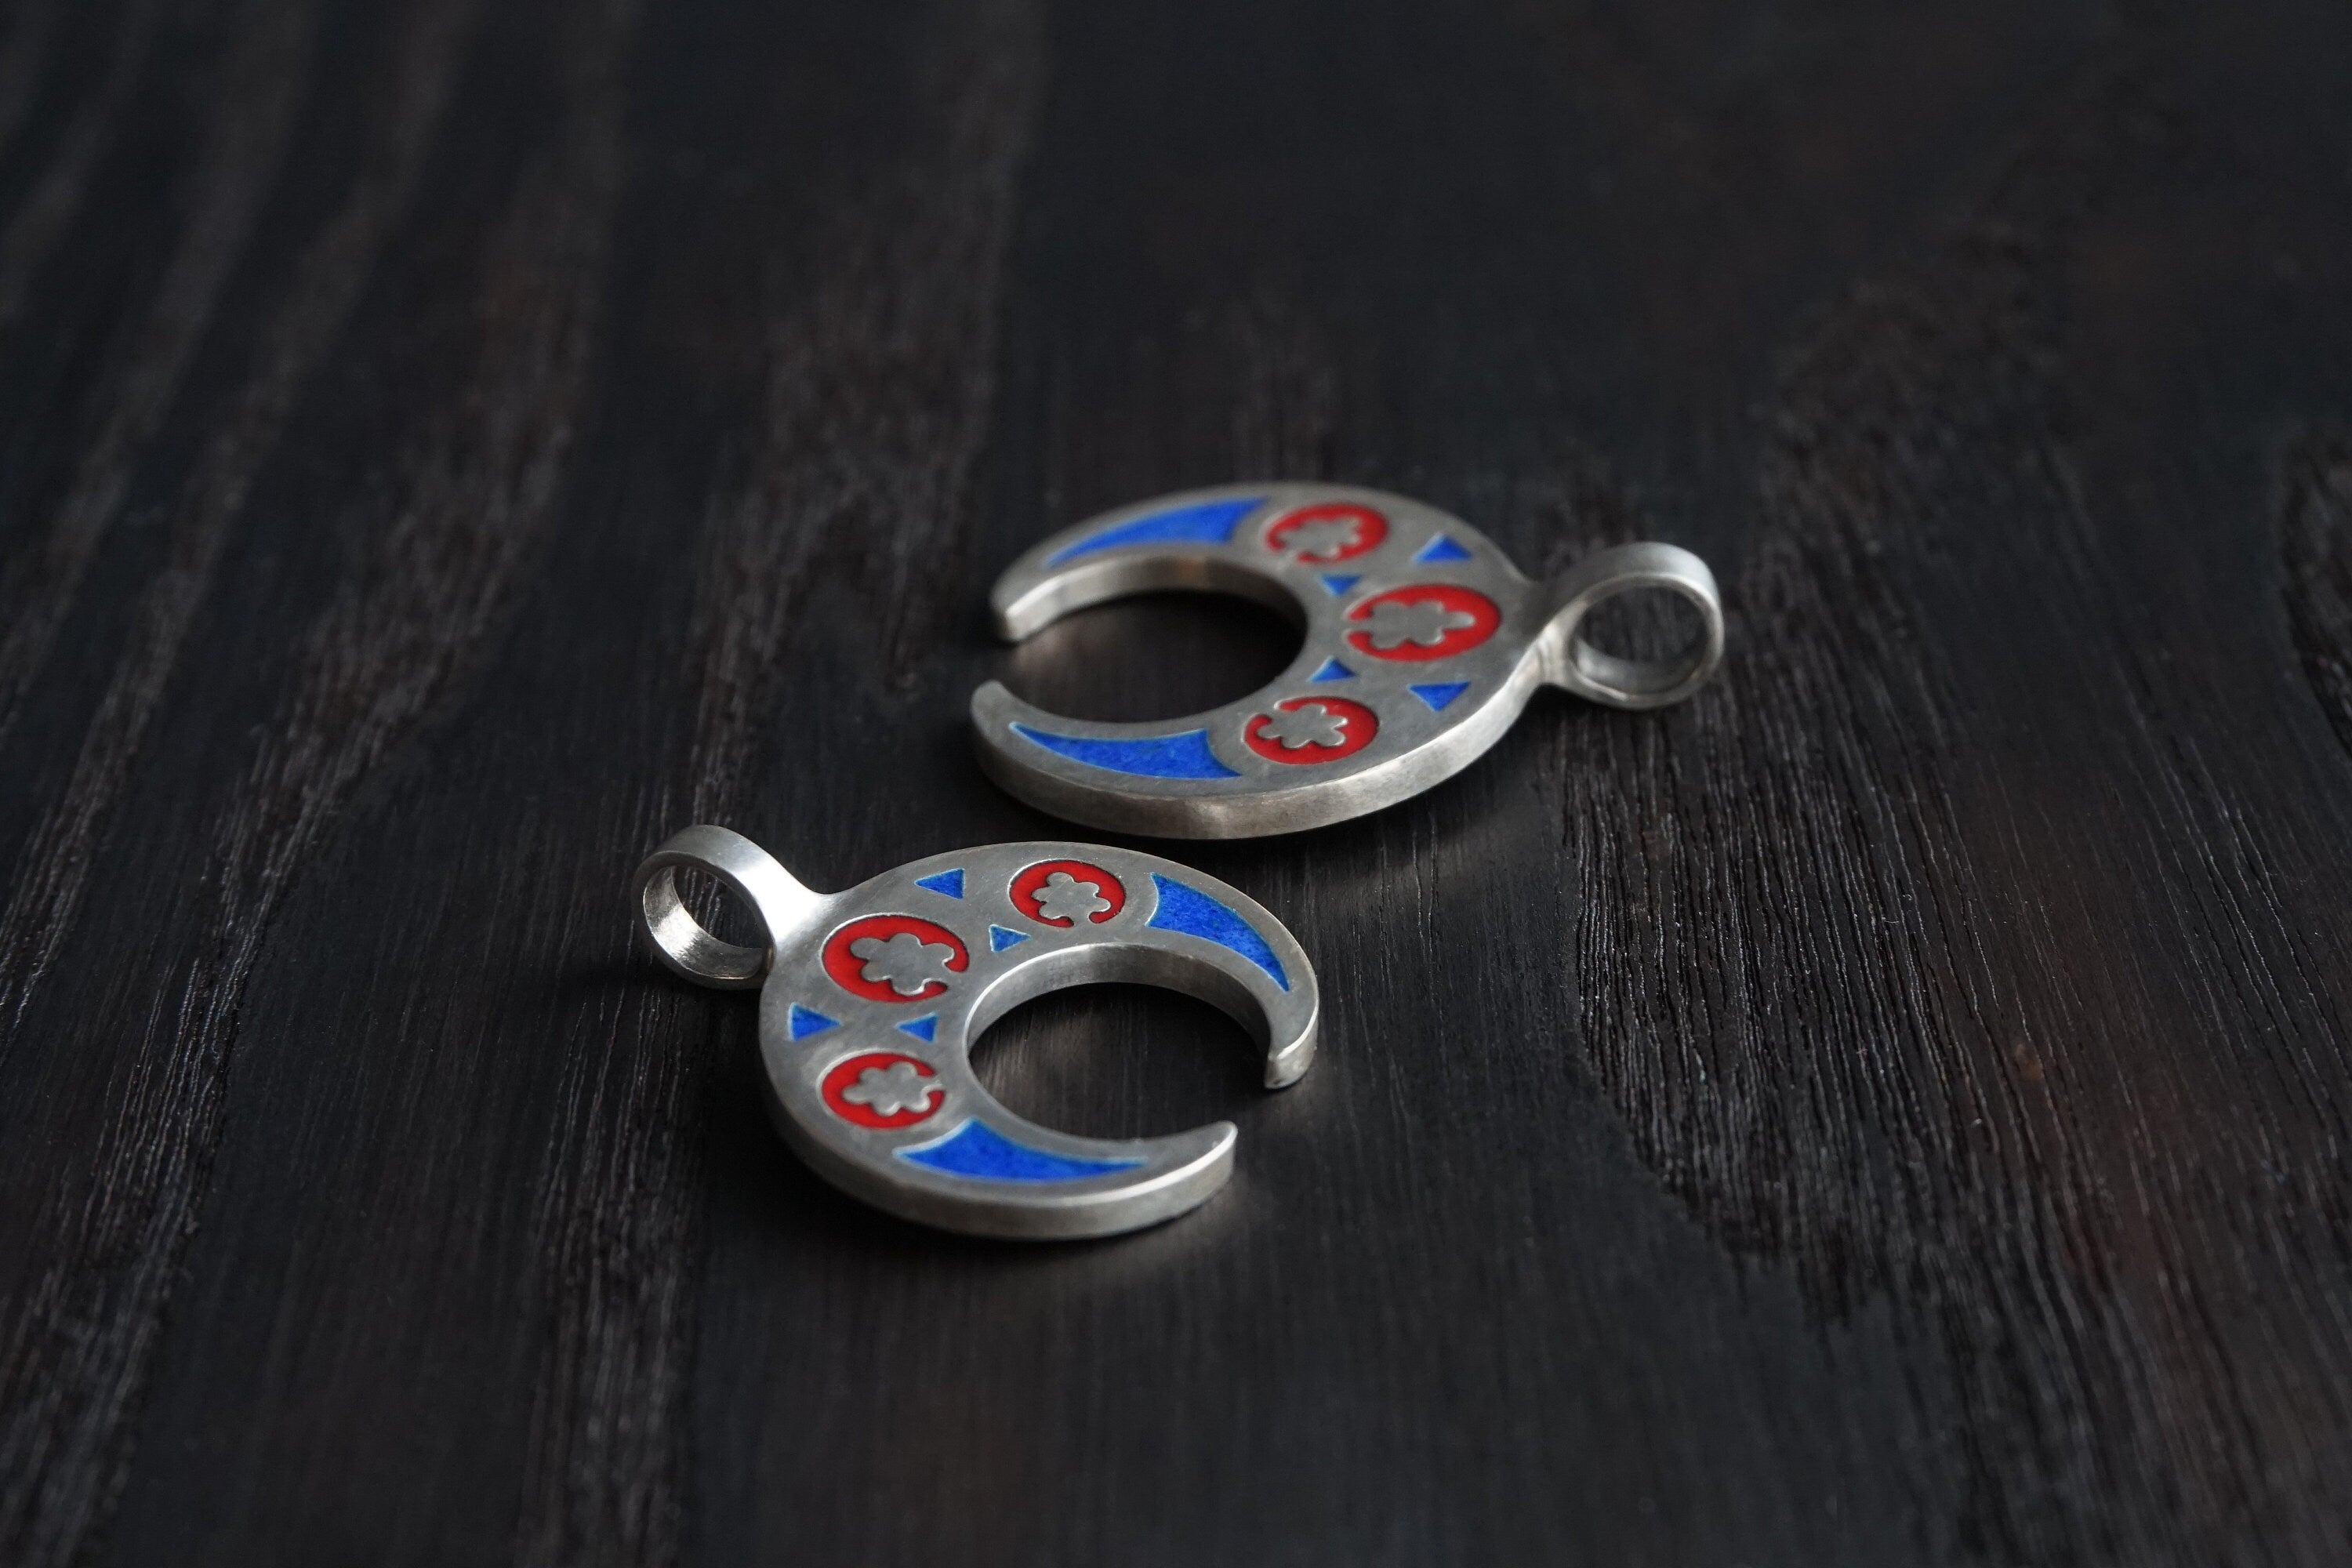 Replica of a Slavic Lunula amulet (available in 2 sizes)